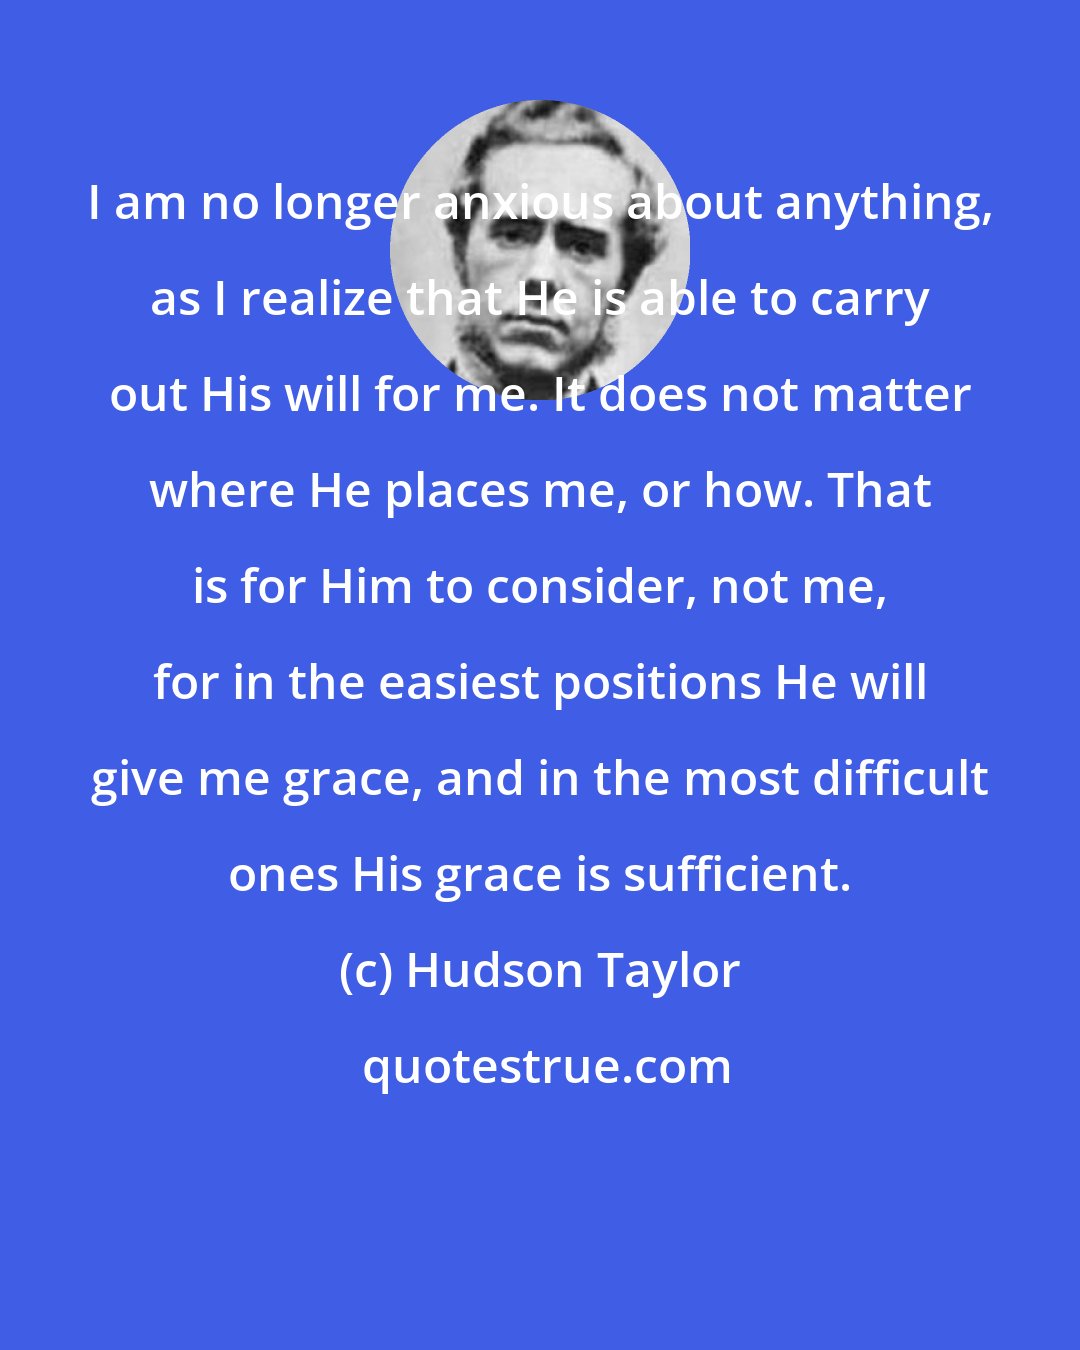 Hudson Taylor: I am no longer anxious about anything, as I realize that He is able to carry out His will for me. It does not matter where He places me, or how. That is for Him to consider, not me, for in the easiest positions He will give me grace, and in the most difficult ones His grace is sufficient.